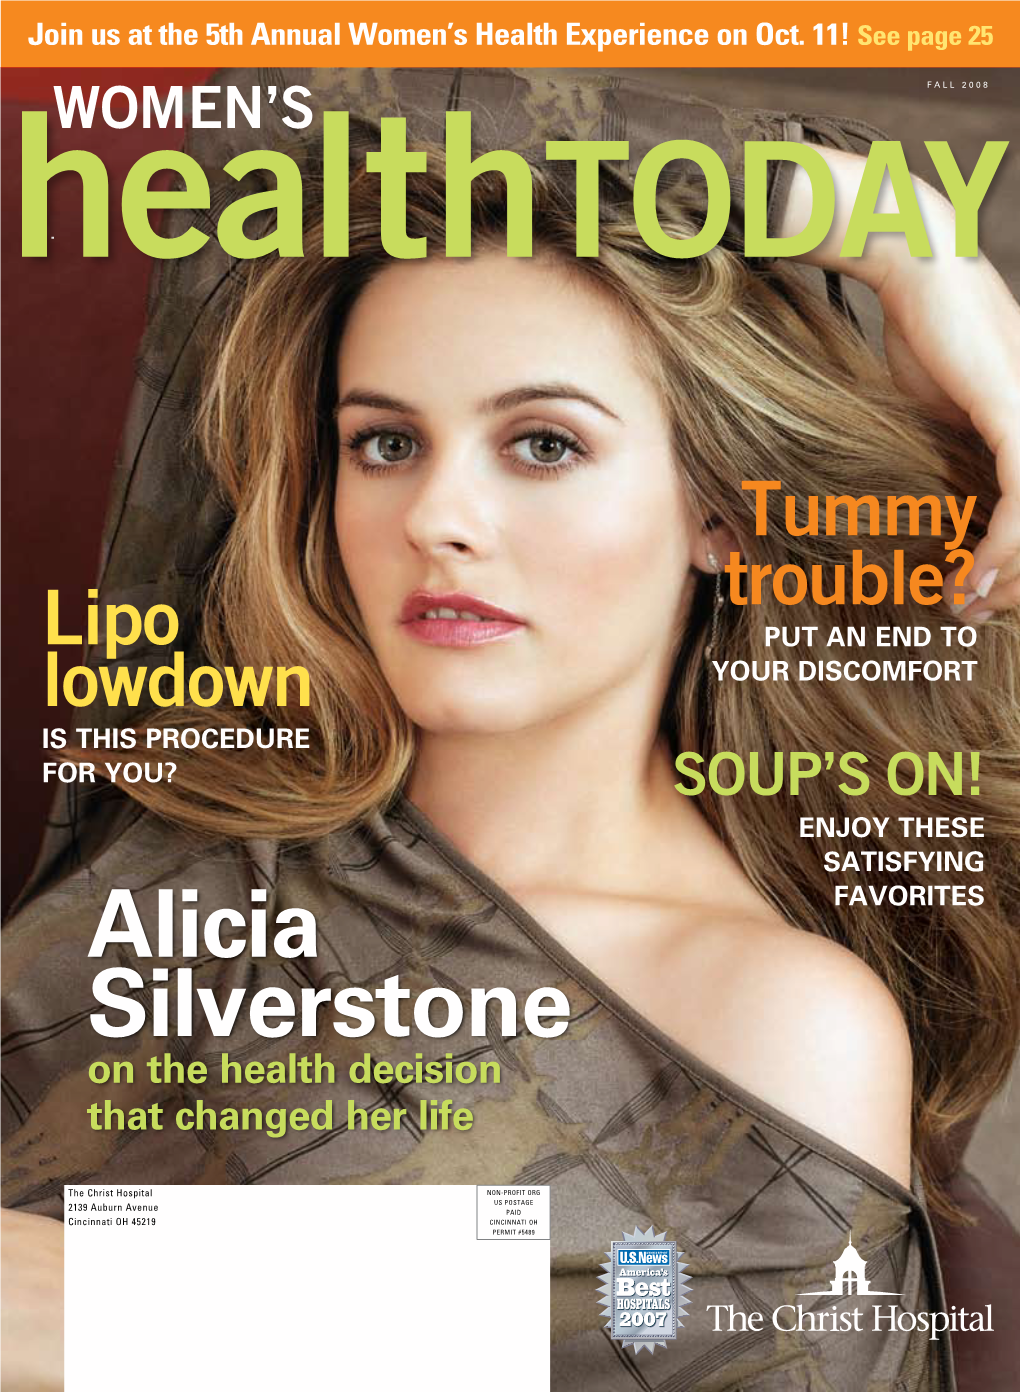 Alicia Silverstone Opens up About the Healthy Habits That Changed Her Life